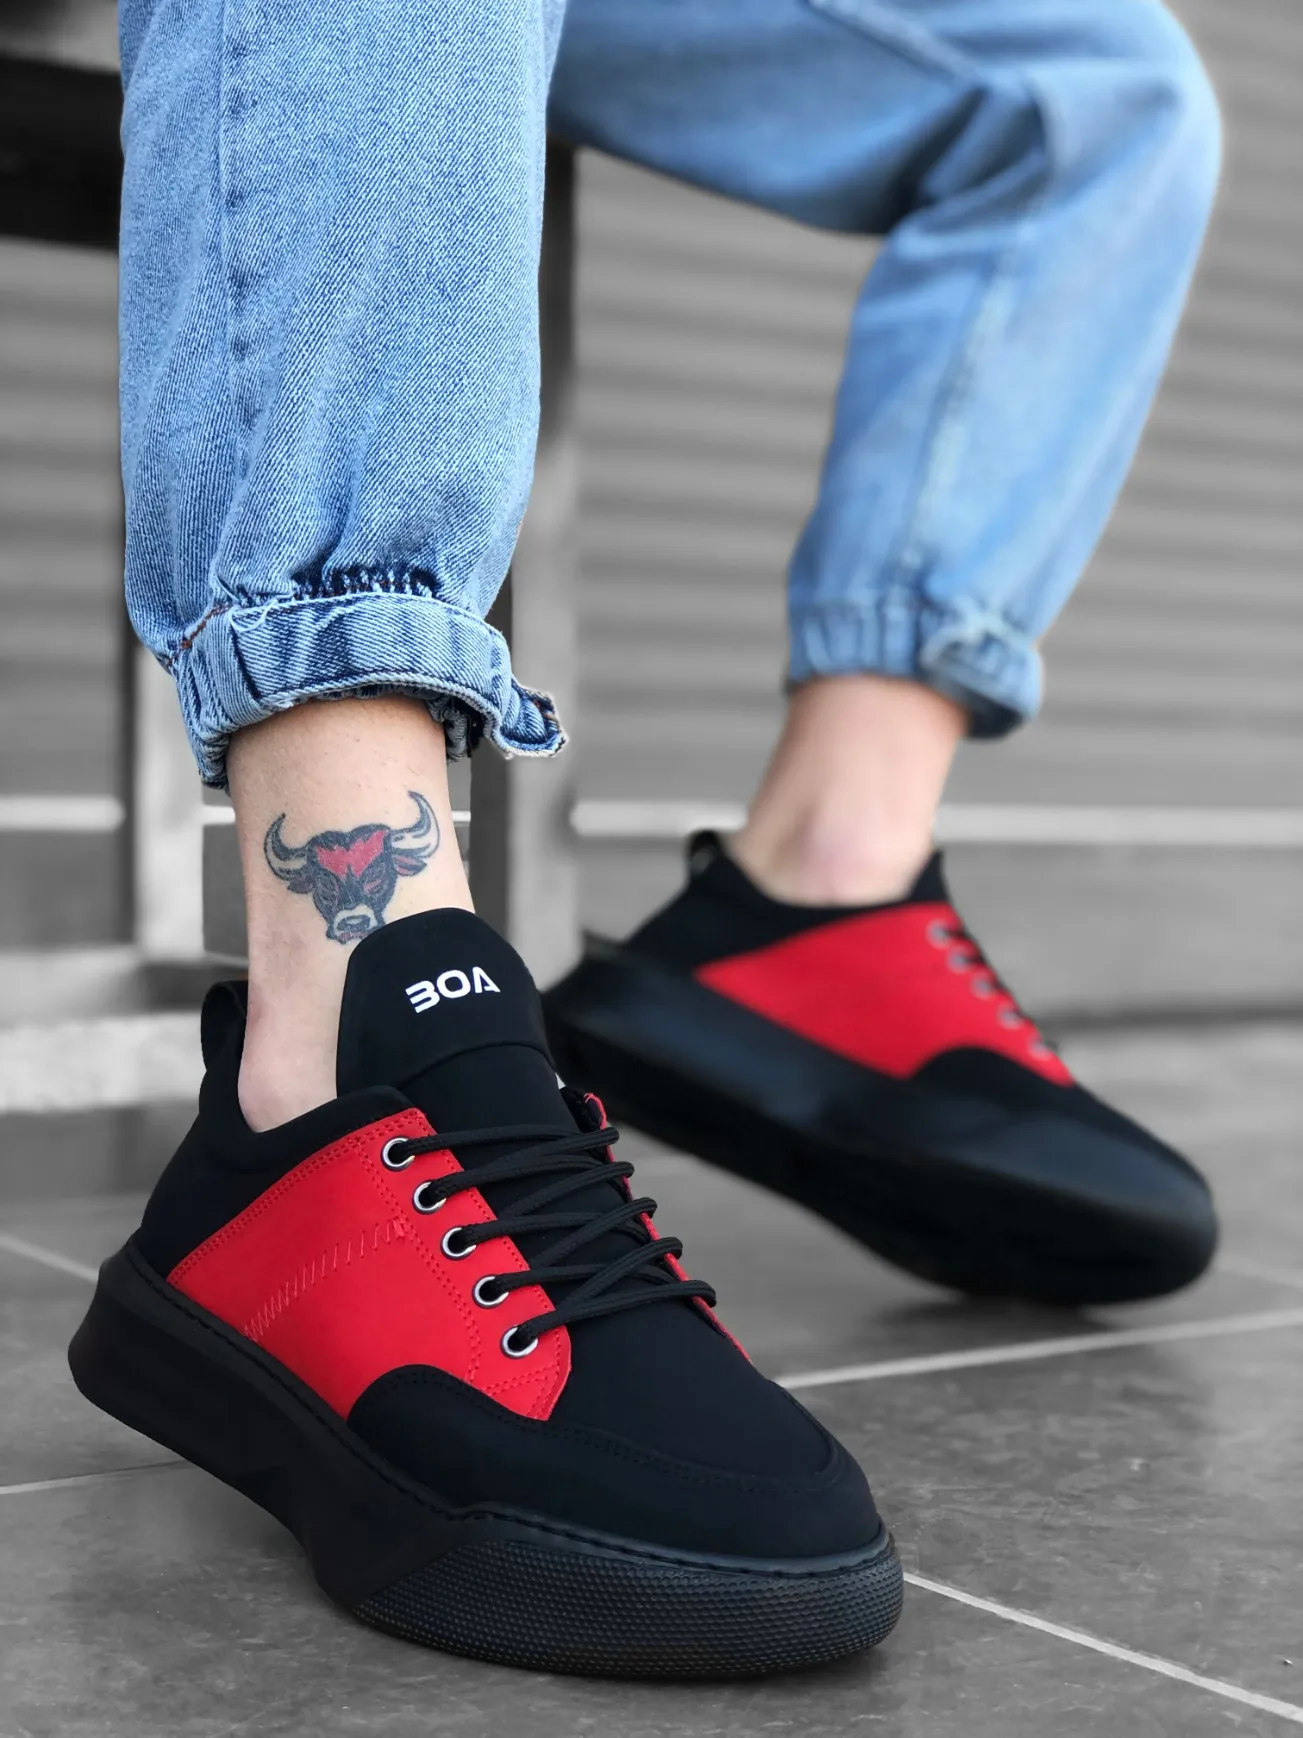 BOA Causal Sports Men 'S Shoes Black Red Casual High Outsole Lace-Up New Generation Original Design Brand Model Trend BA0163